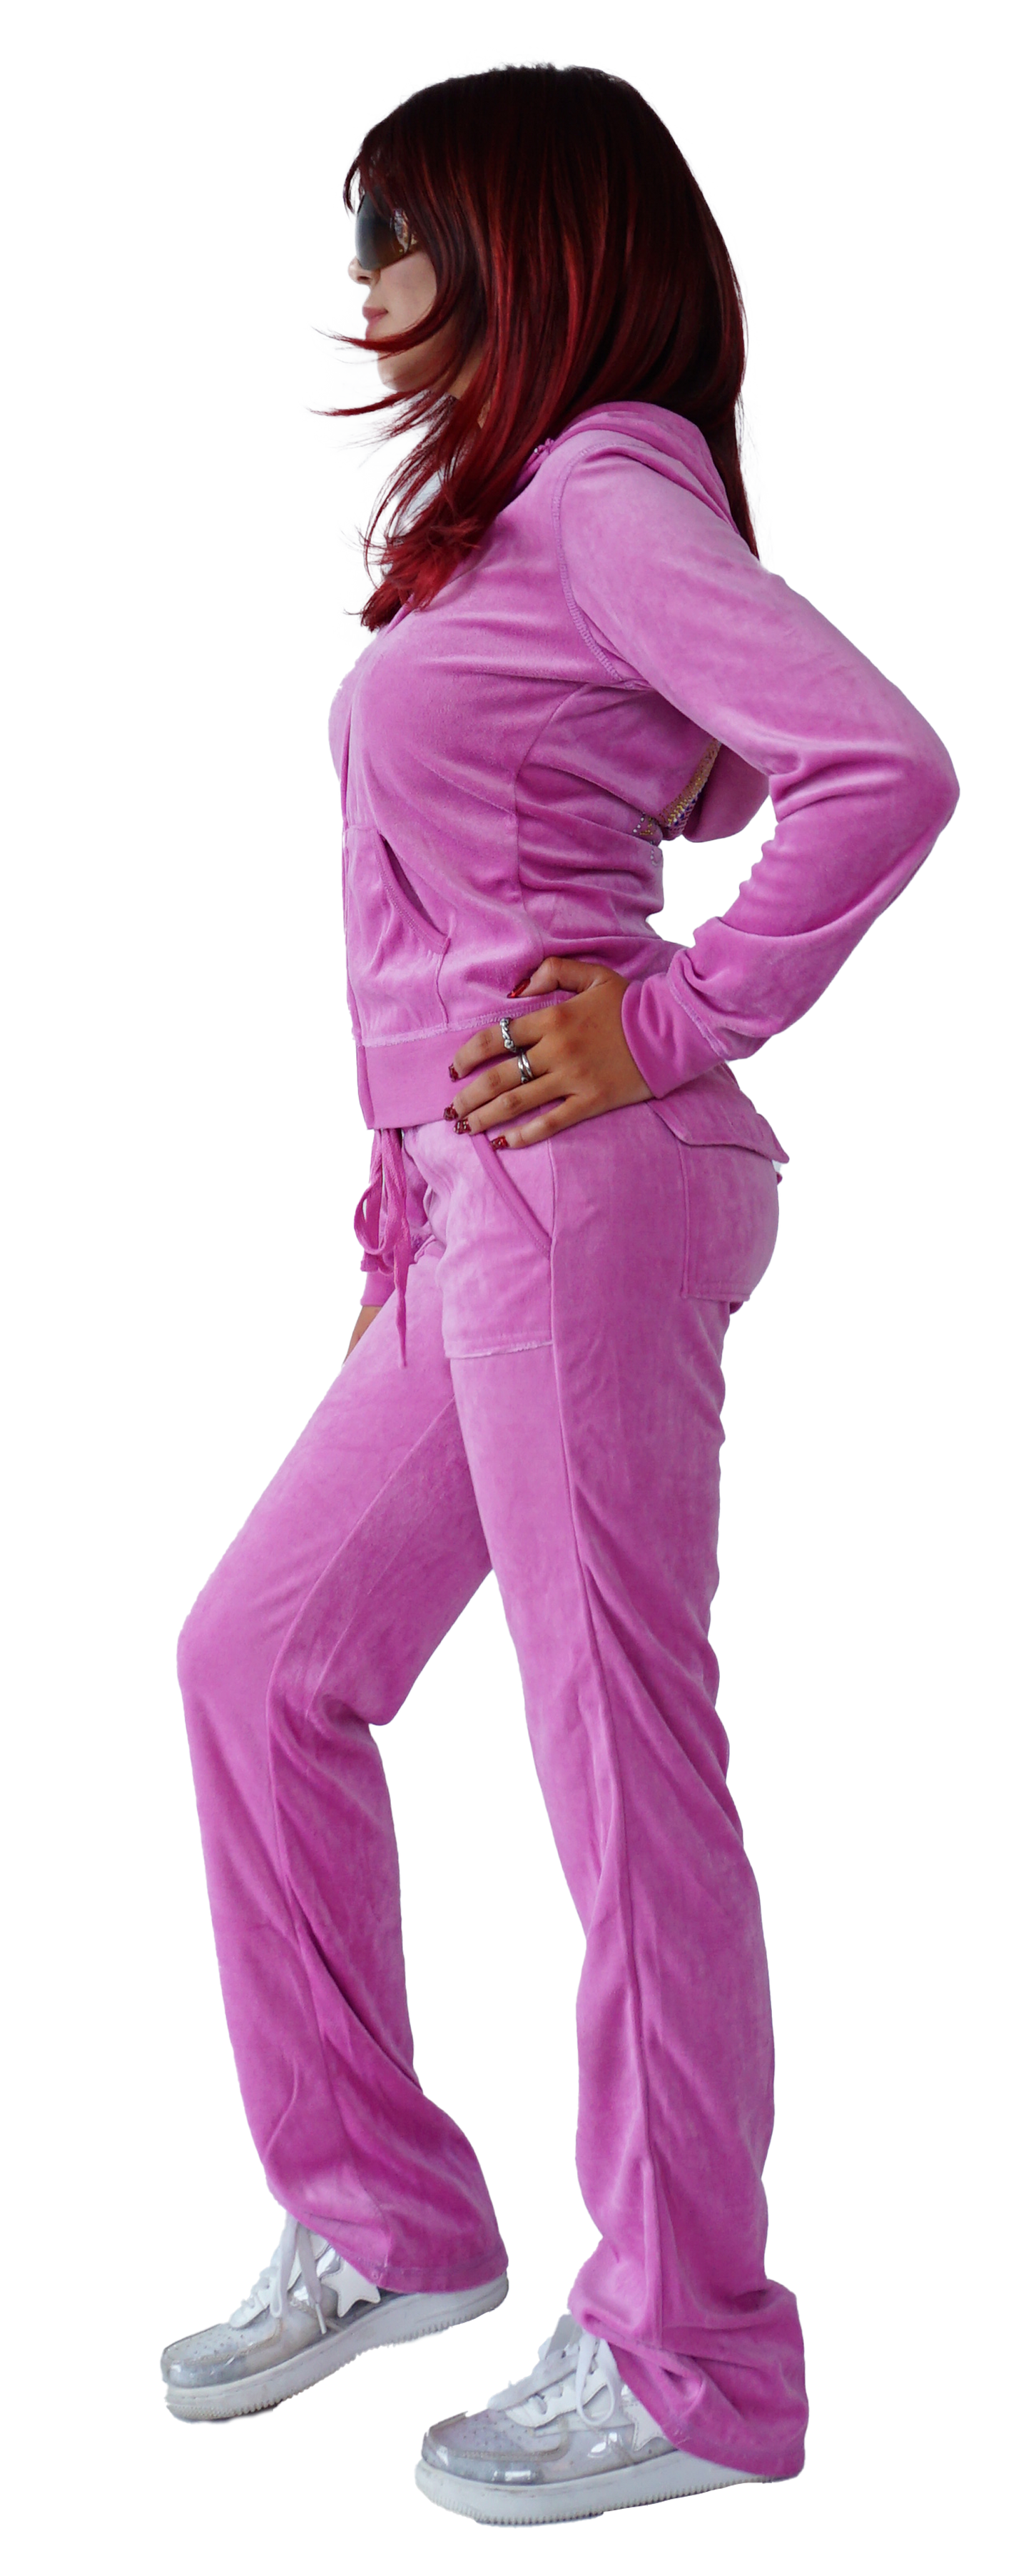 The BONE AMIS Tracksuit- Pink